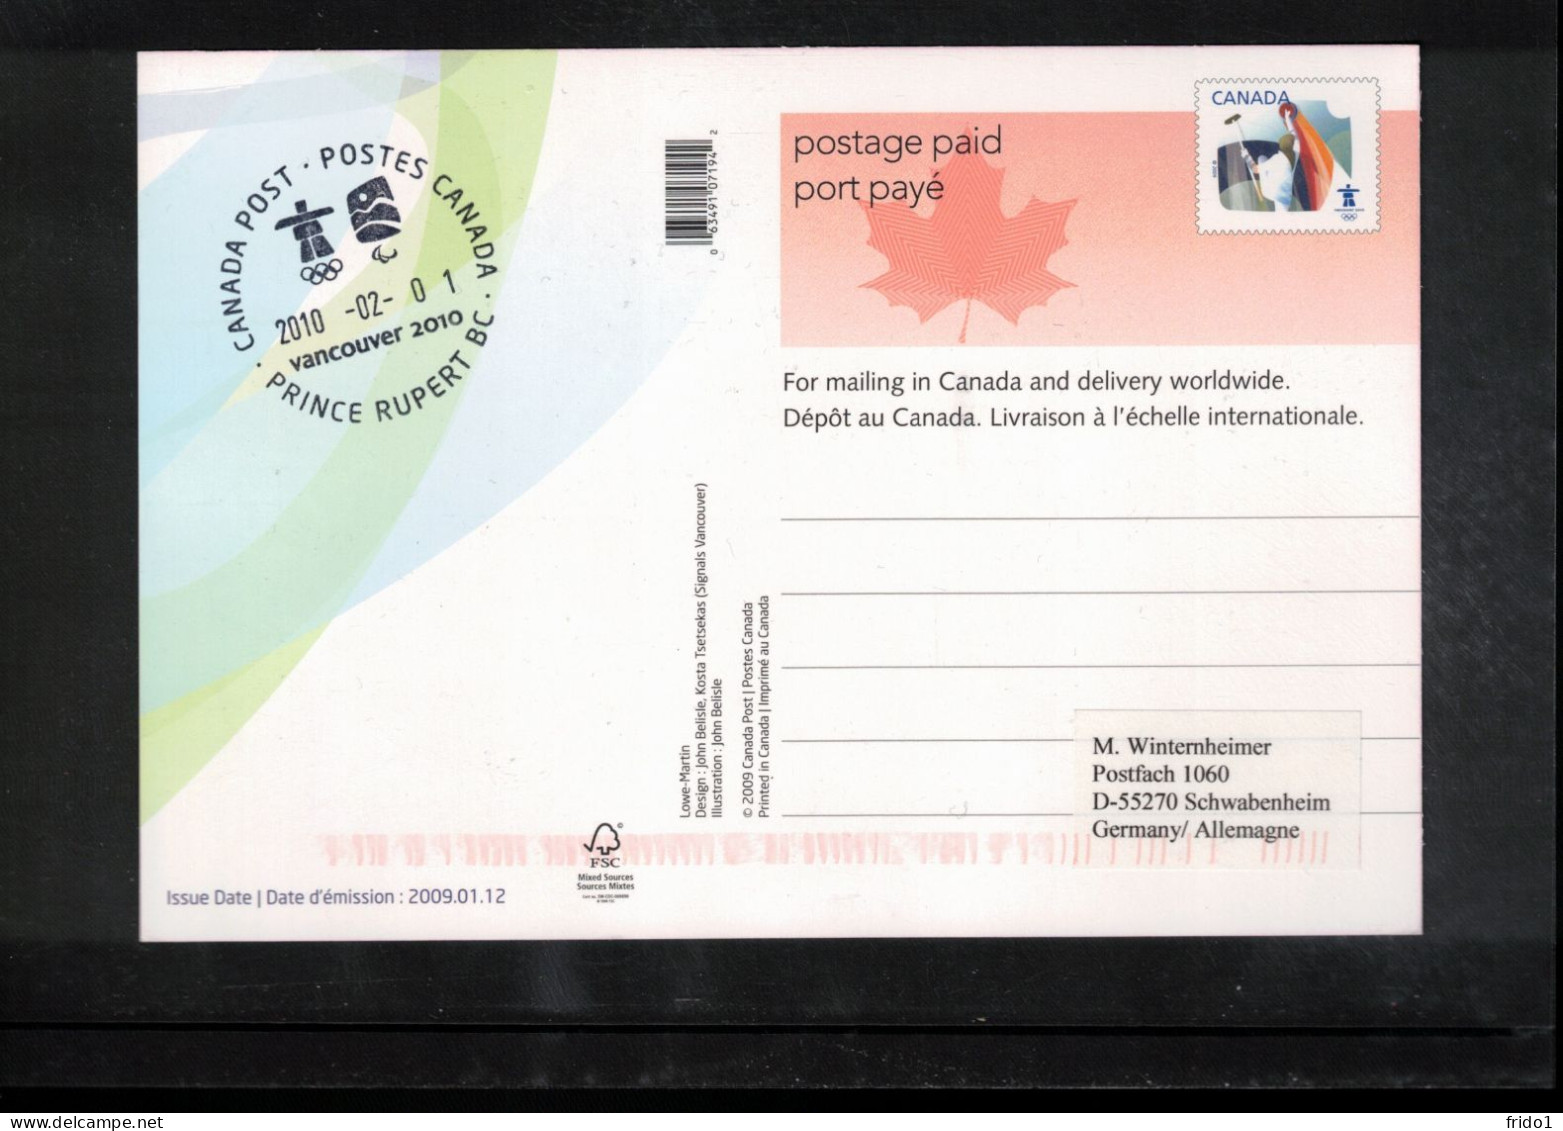 Canada 2010 Olympic Games Vancouver - PRINCE RUPERT BC Postmark Interesting Postcard - Winter 2010: Vancouver